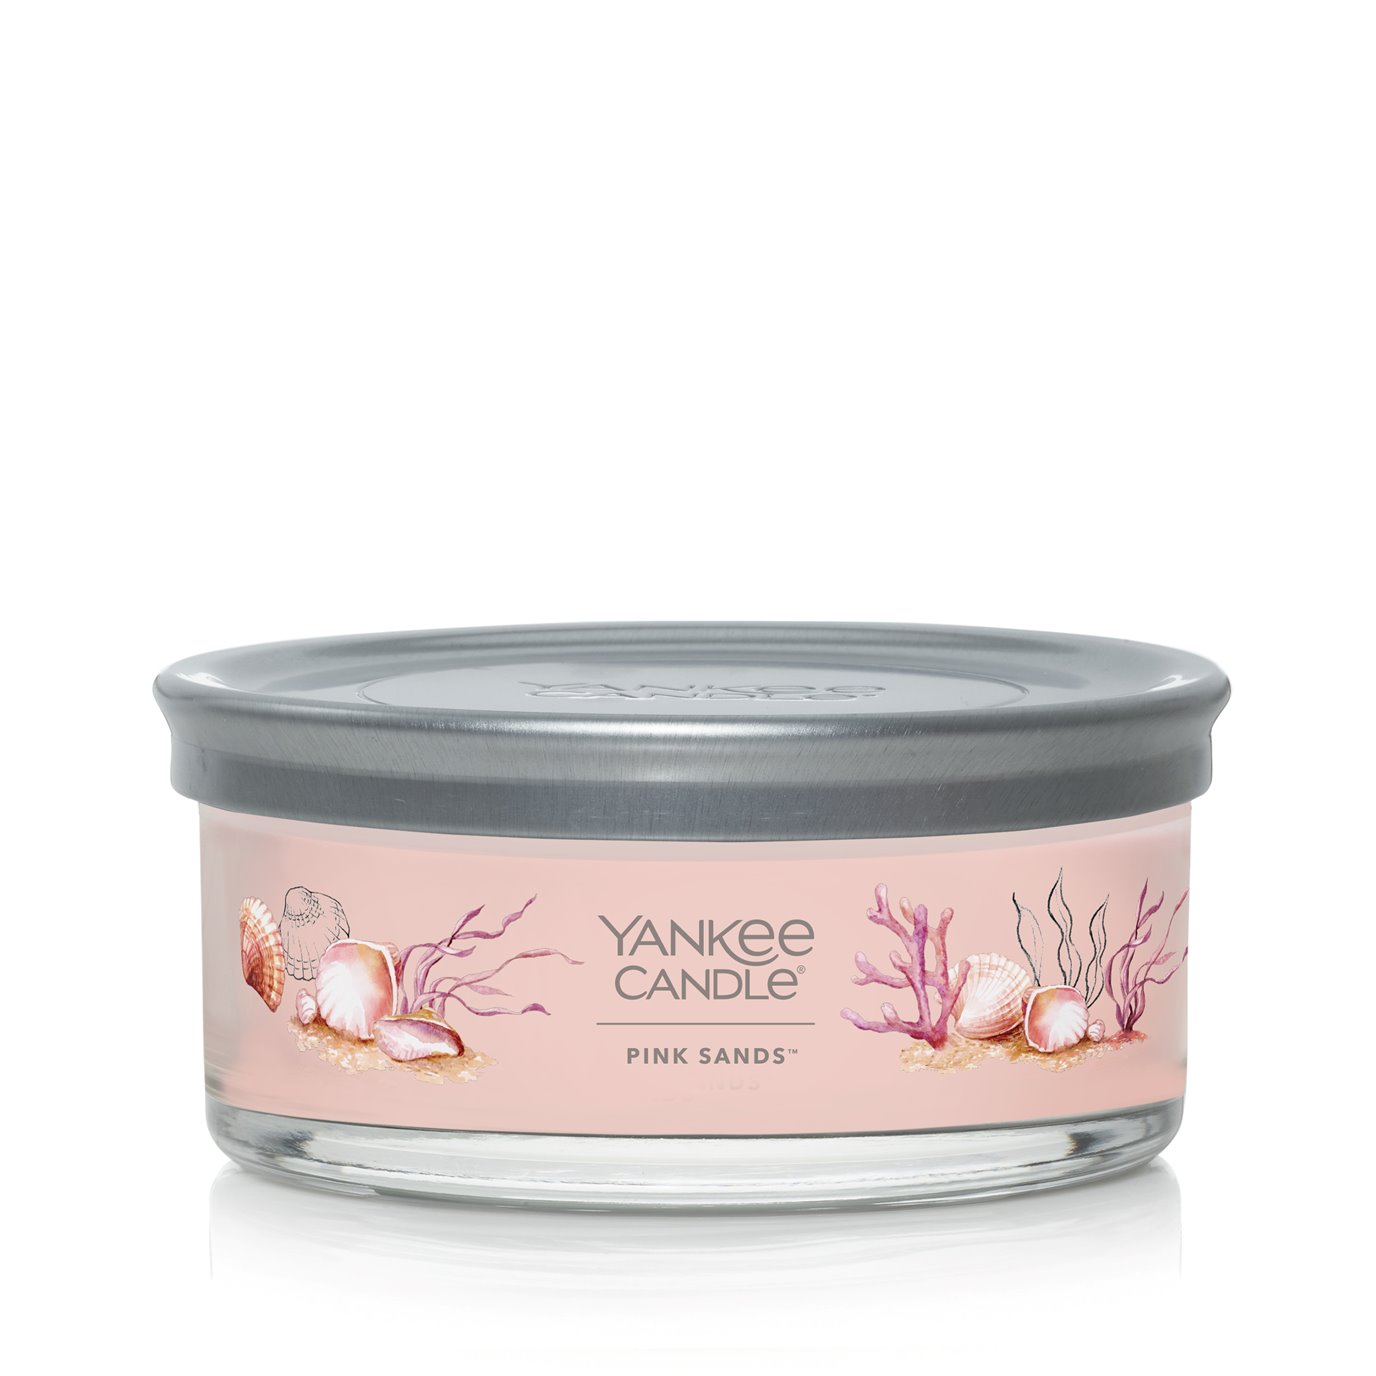 Yankee Candle Pink Sands Signature 5-Wick Tumbler